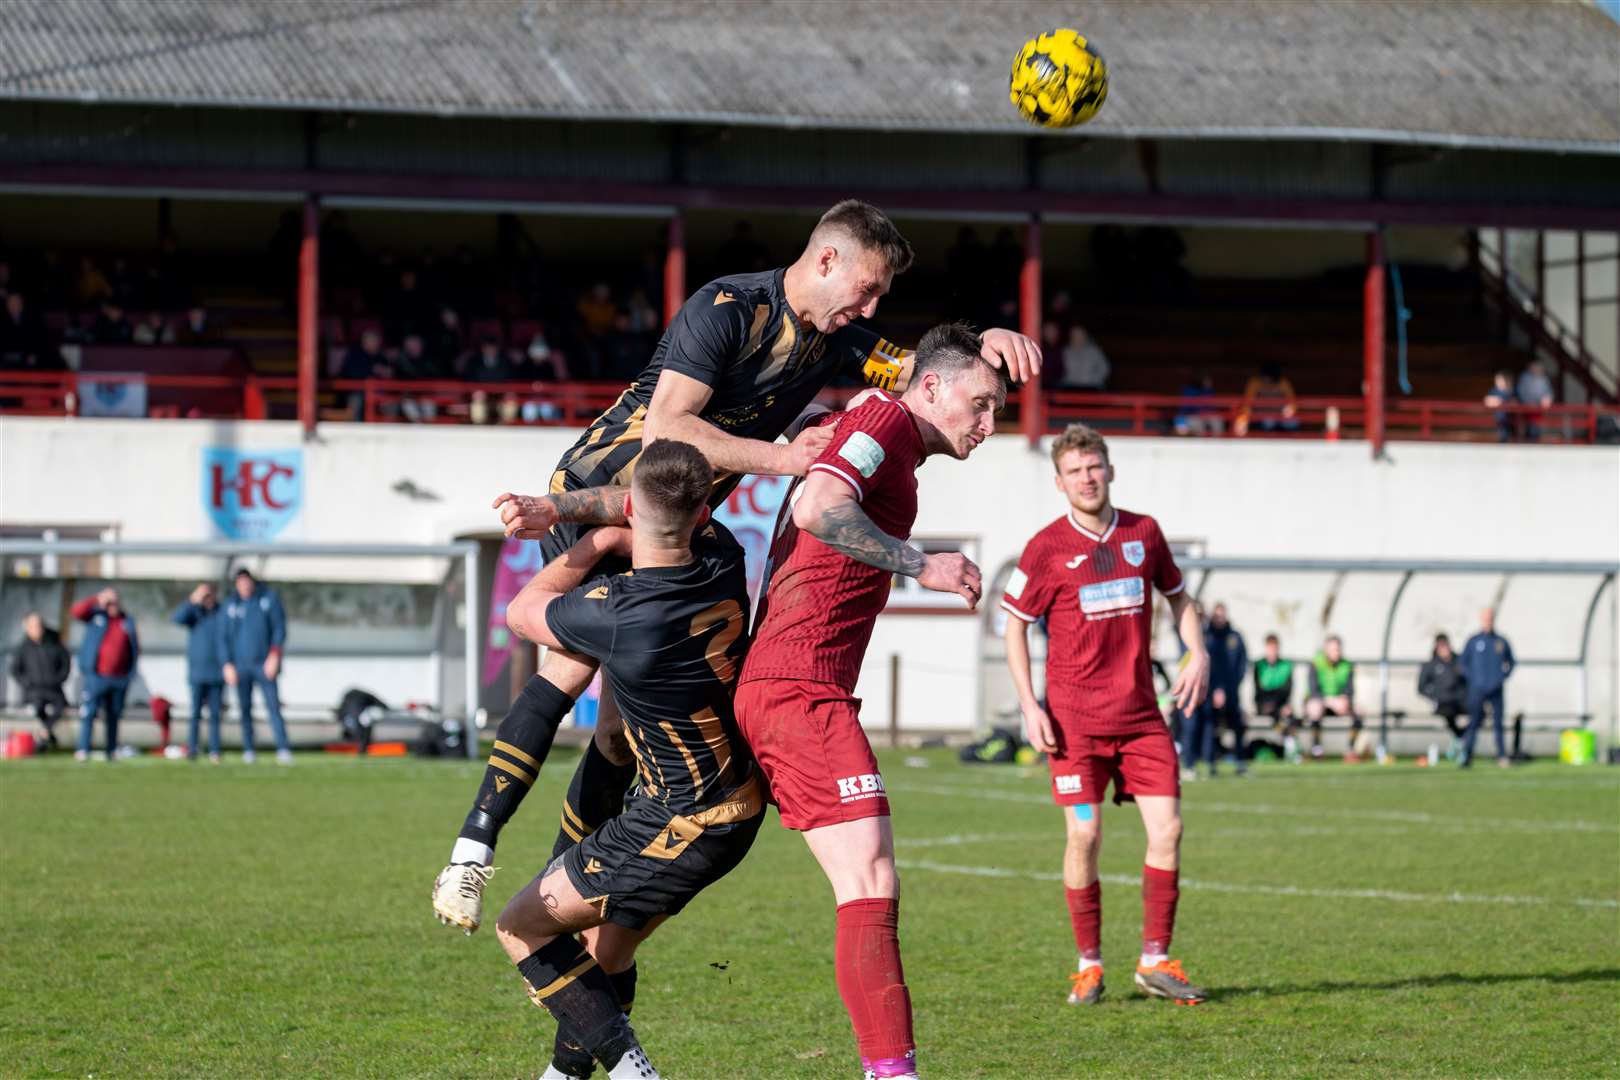 EL_Keith v Huntly 17Keith's Michael Taylor and Huntly's James Connelly and Michael Clark battle it out for the ball.Keith F.C (1) v Huntly F.C (0) at Kynoch Park, Keith. Highland Football League.Picture: Beth Taylor